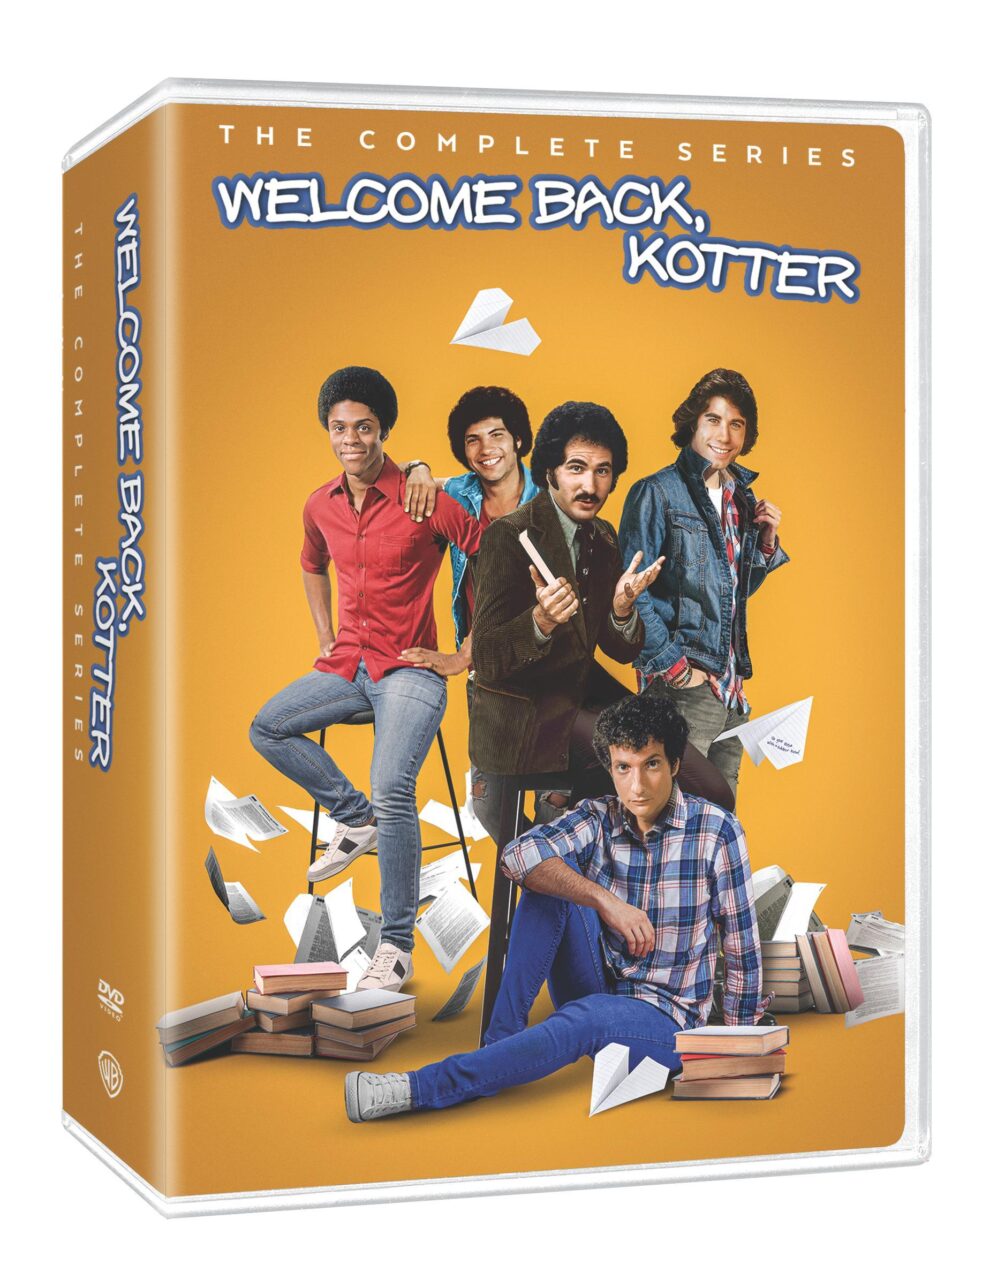 Welcome Back, Kotter: The Complete Series DVD cover (Warner Bros. Discovery)